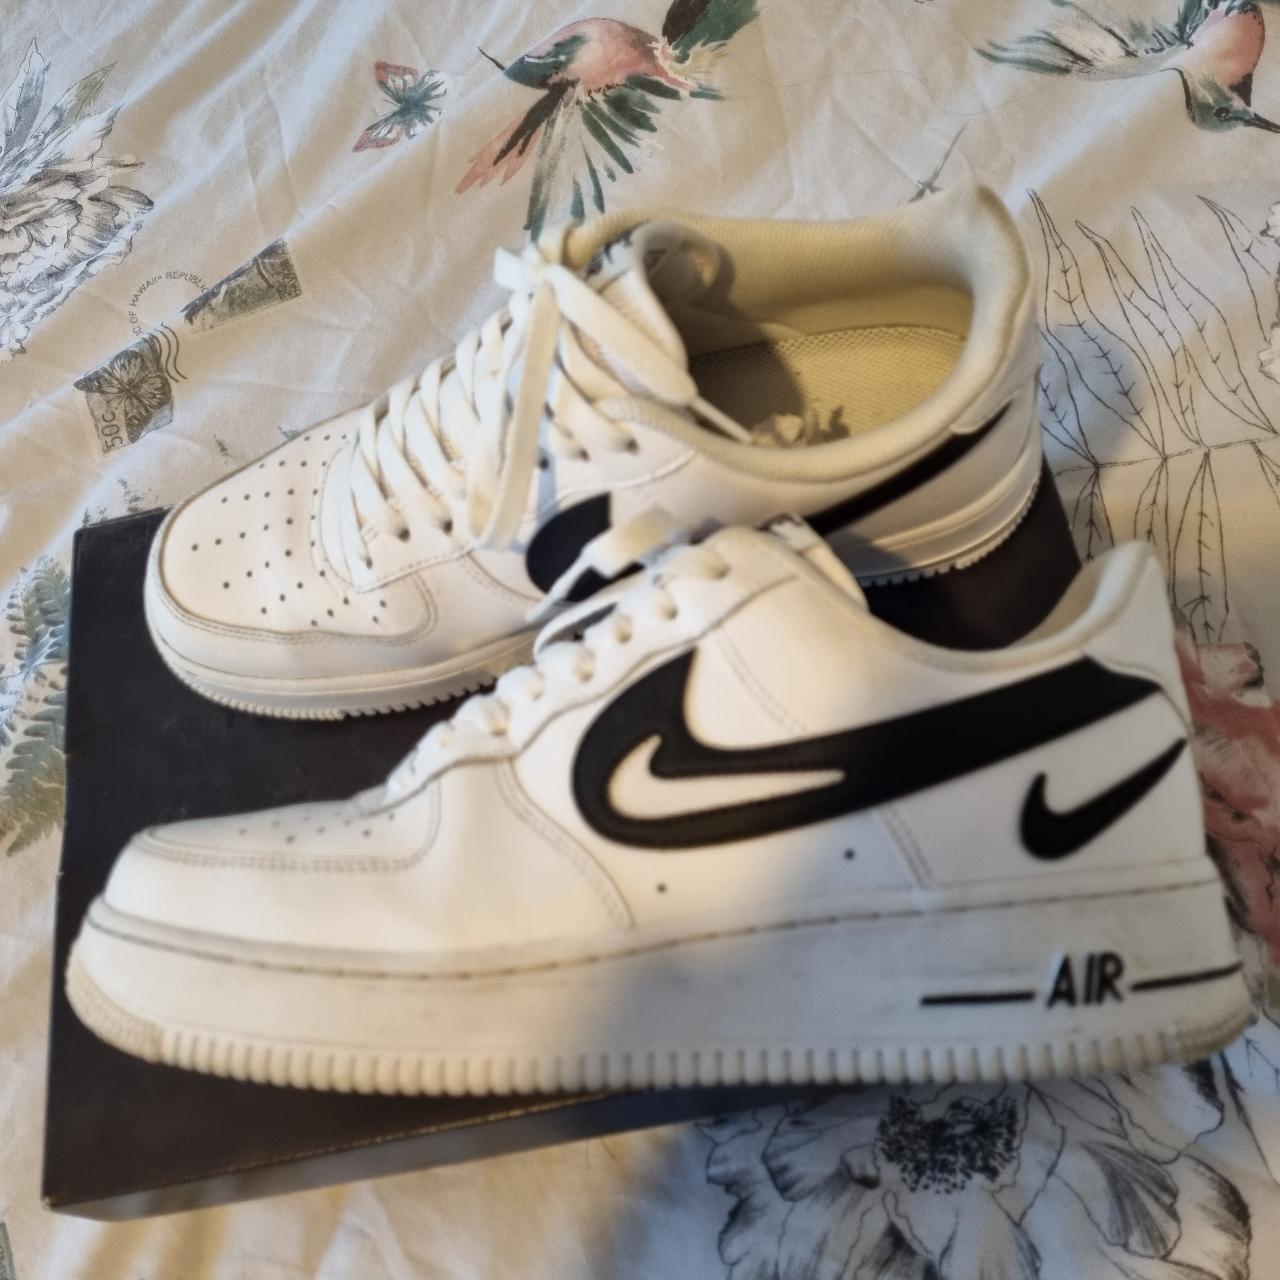 Nike Air Force 1 LV 08 Size 8 US Condo 8/10 Postage - Depop